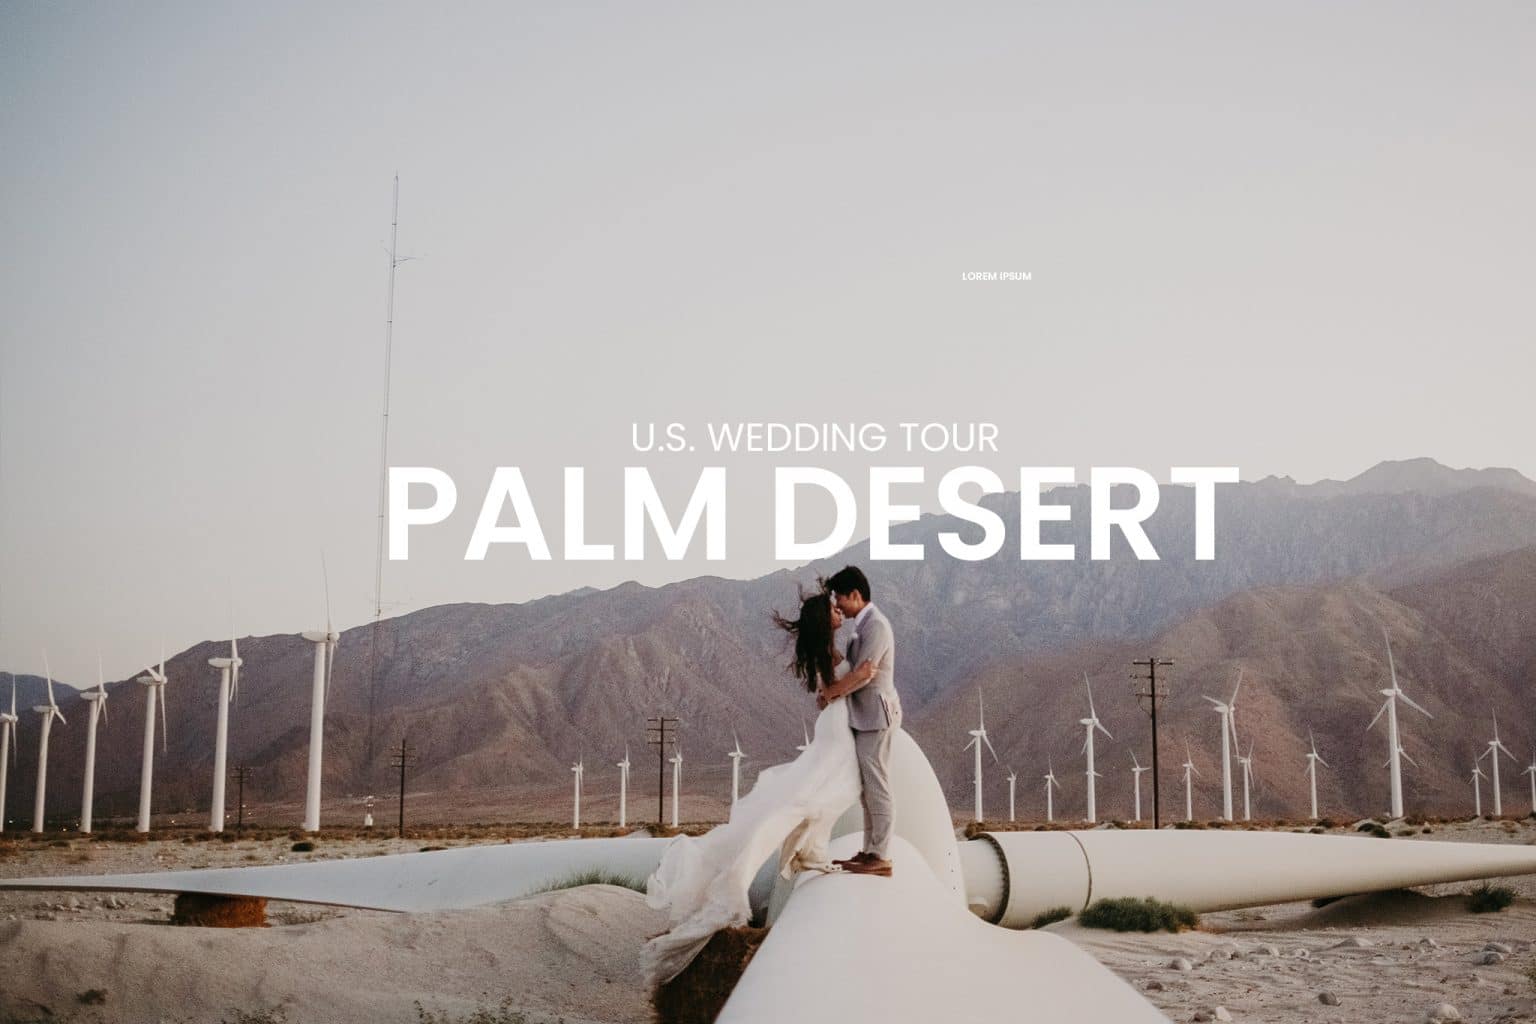 Wedding couple kissing in the desert in the background with giant windmills